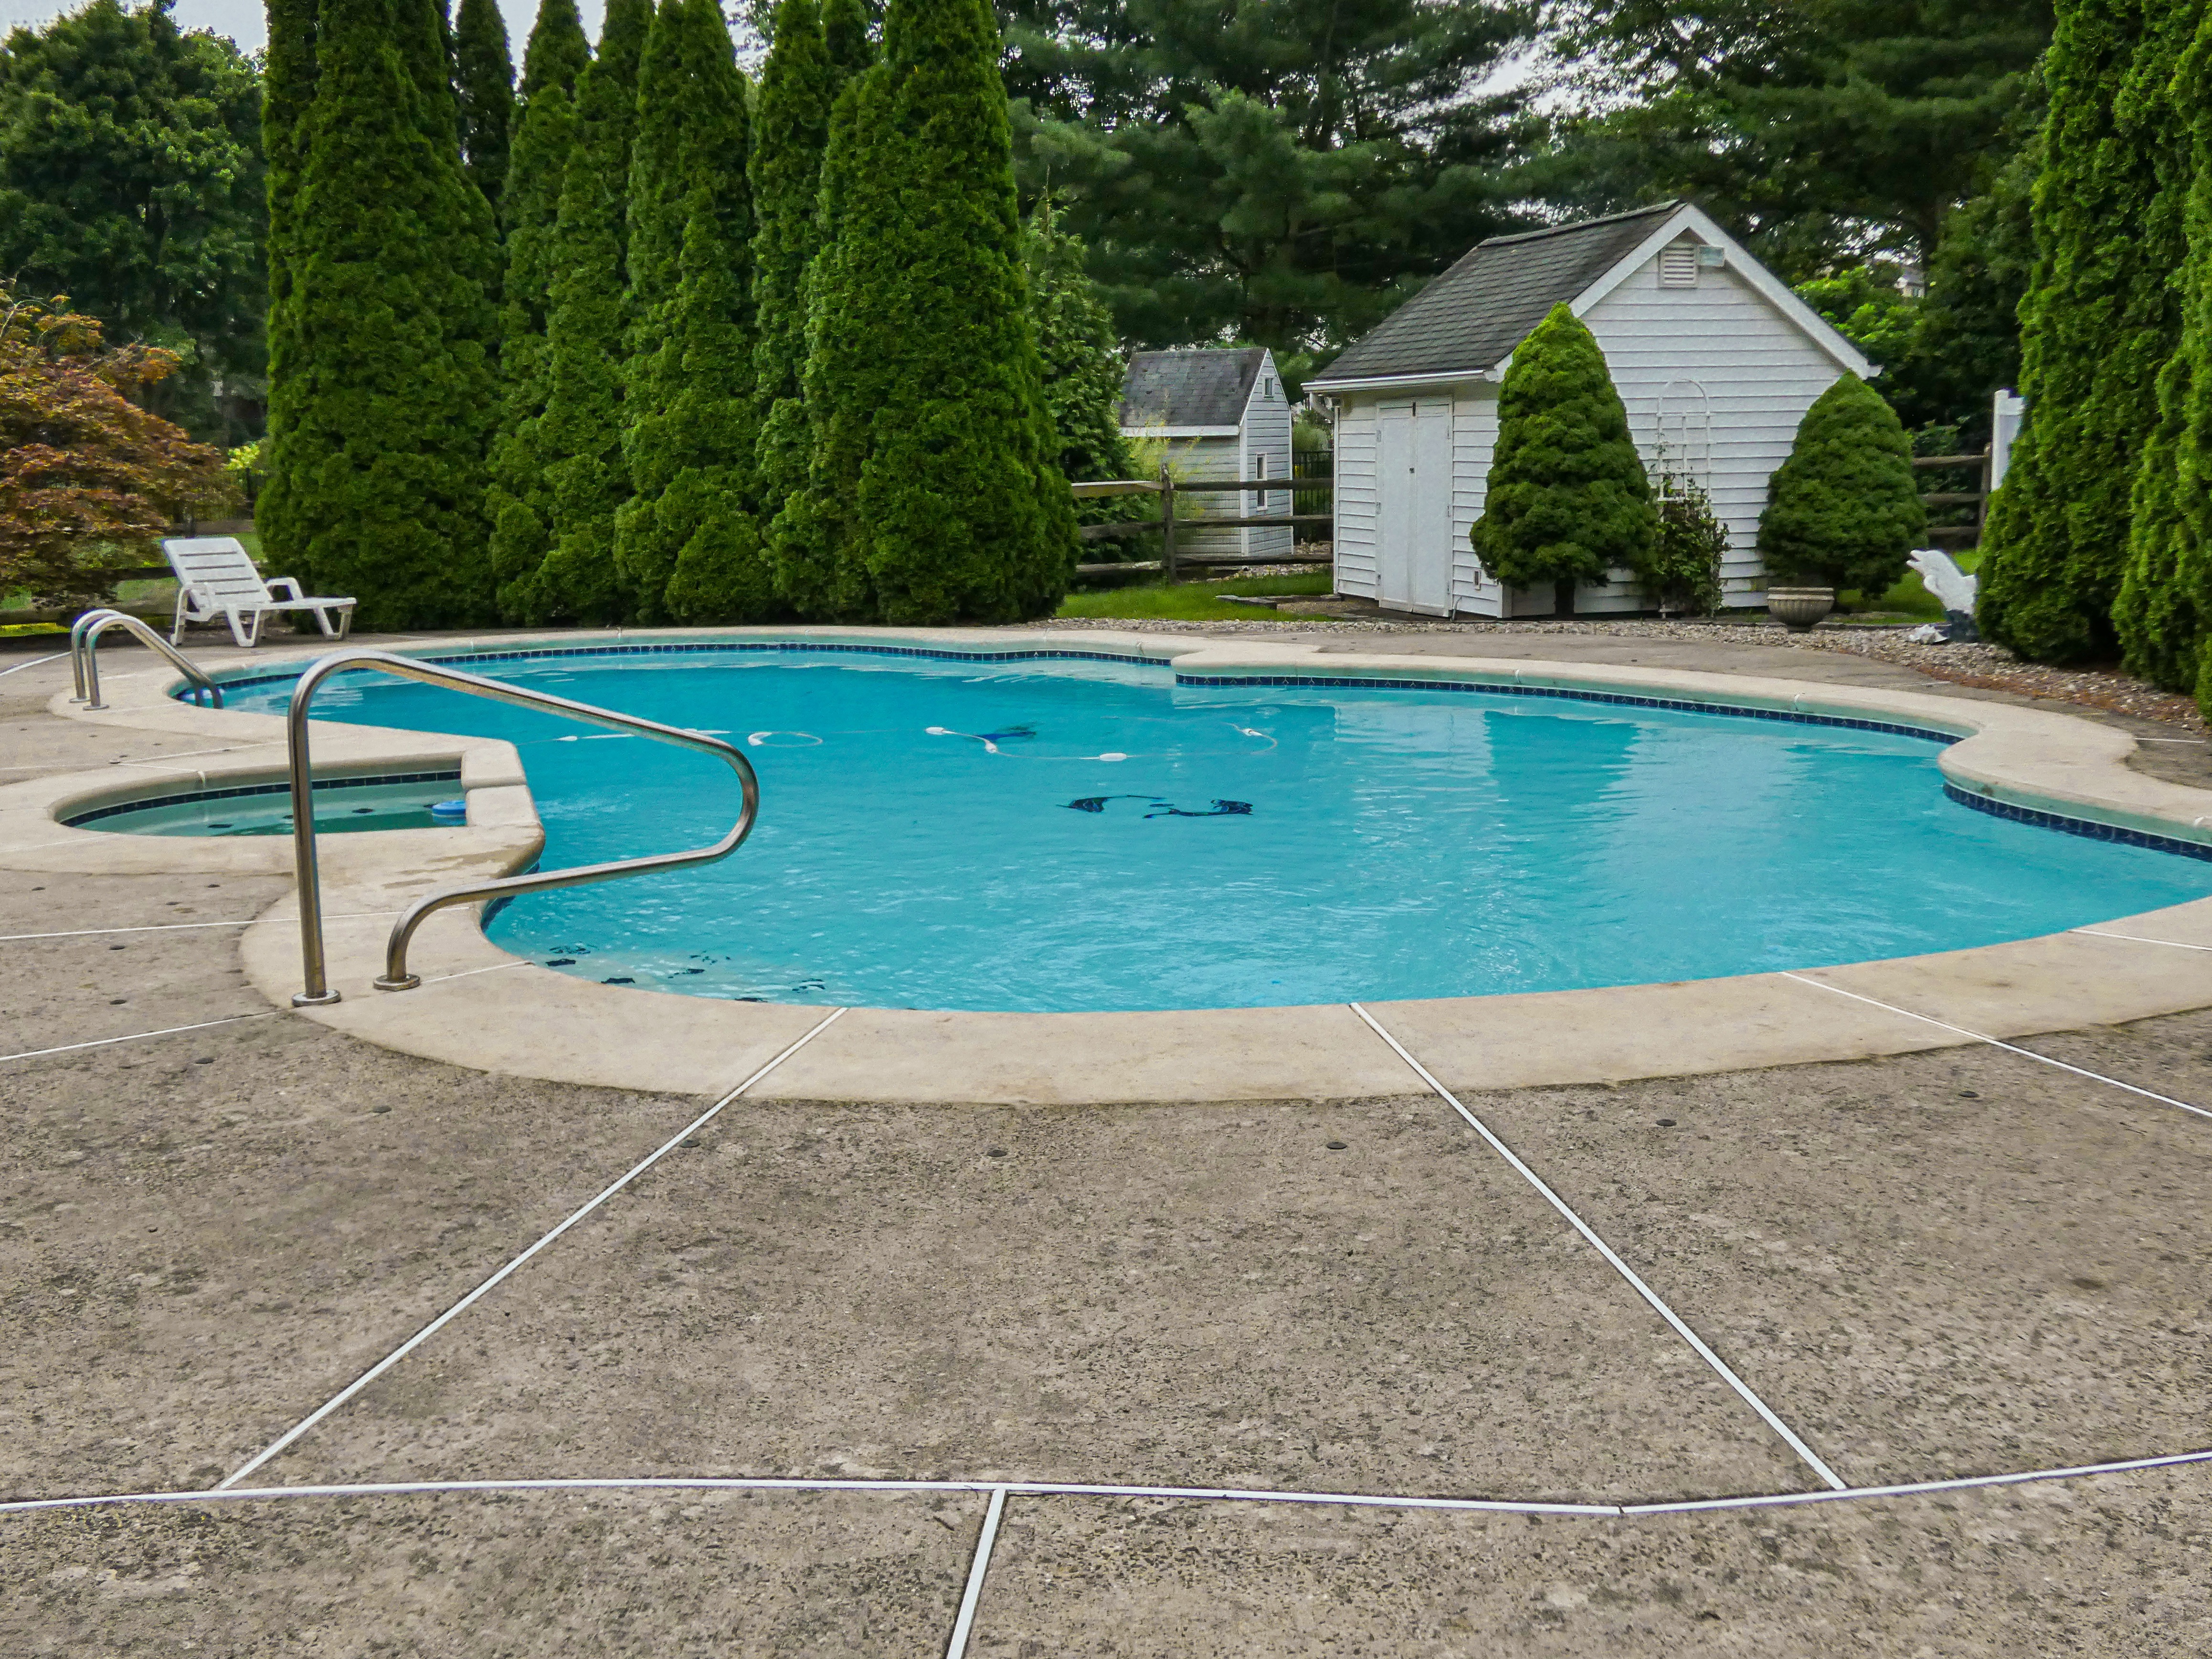 Here’s a picture of the pool at the house I’m moving into (my grandmothers house). Installed 20yrs ago by my grandfather. | image tagged in share your own photos | made w/ Imgflip meme maker